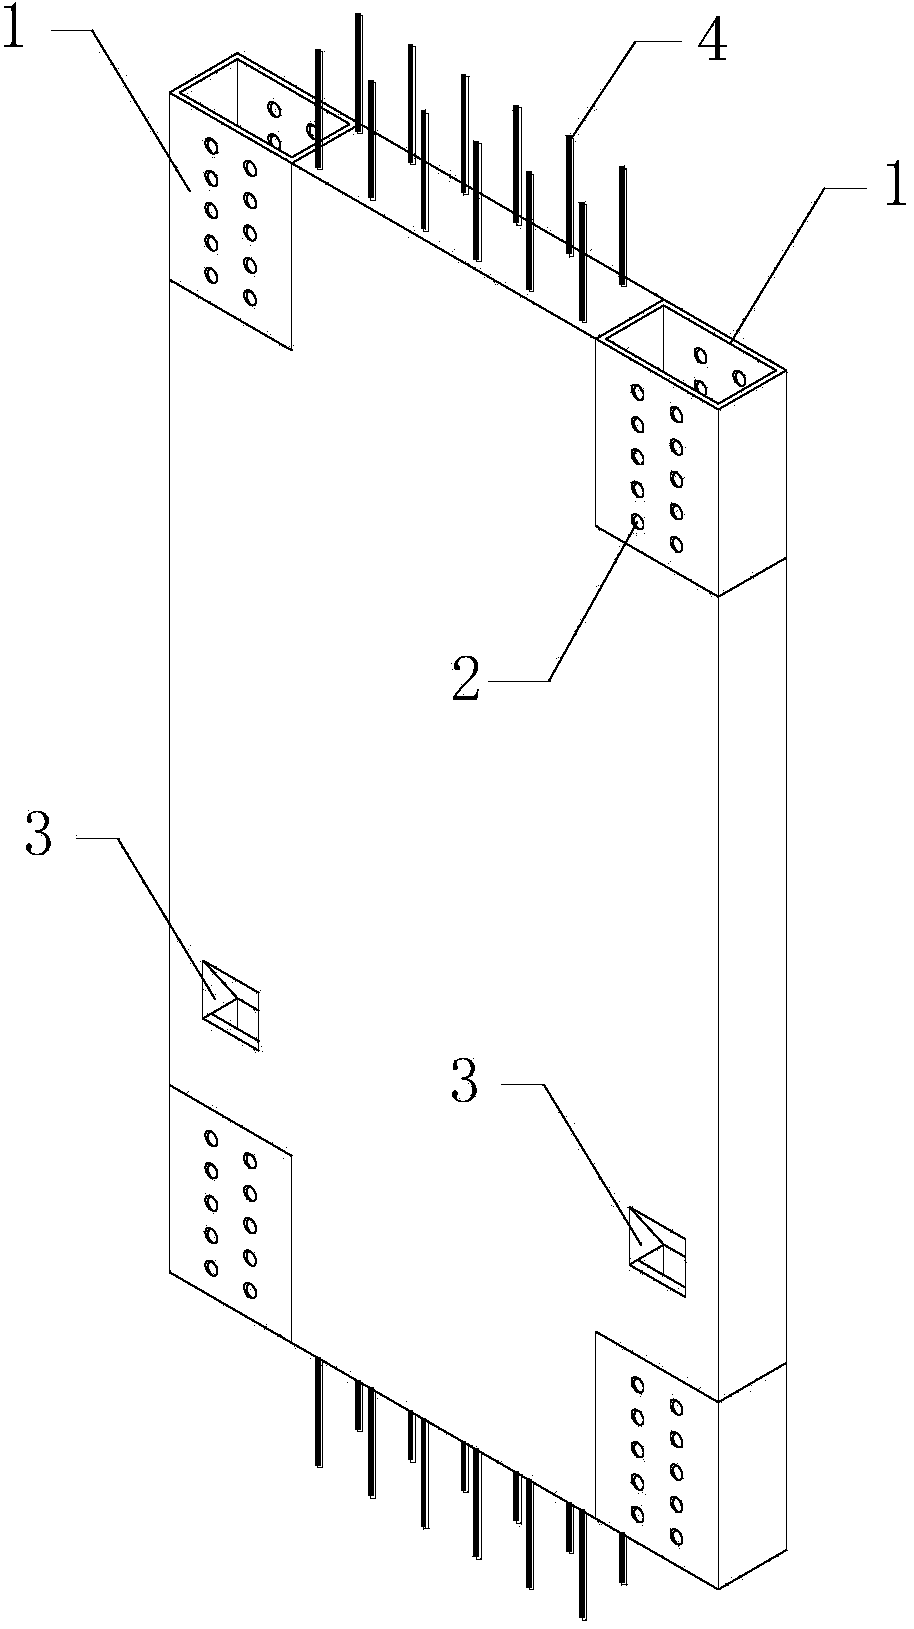 Assembled shear wall and wall-beam connecting structure with edge restraining component